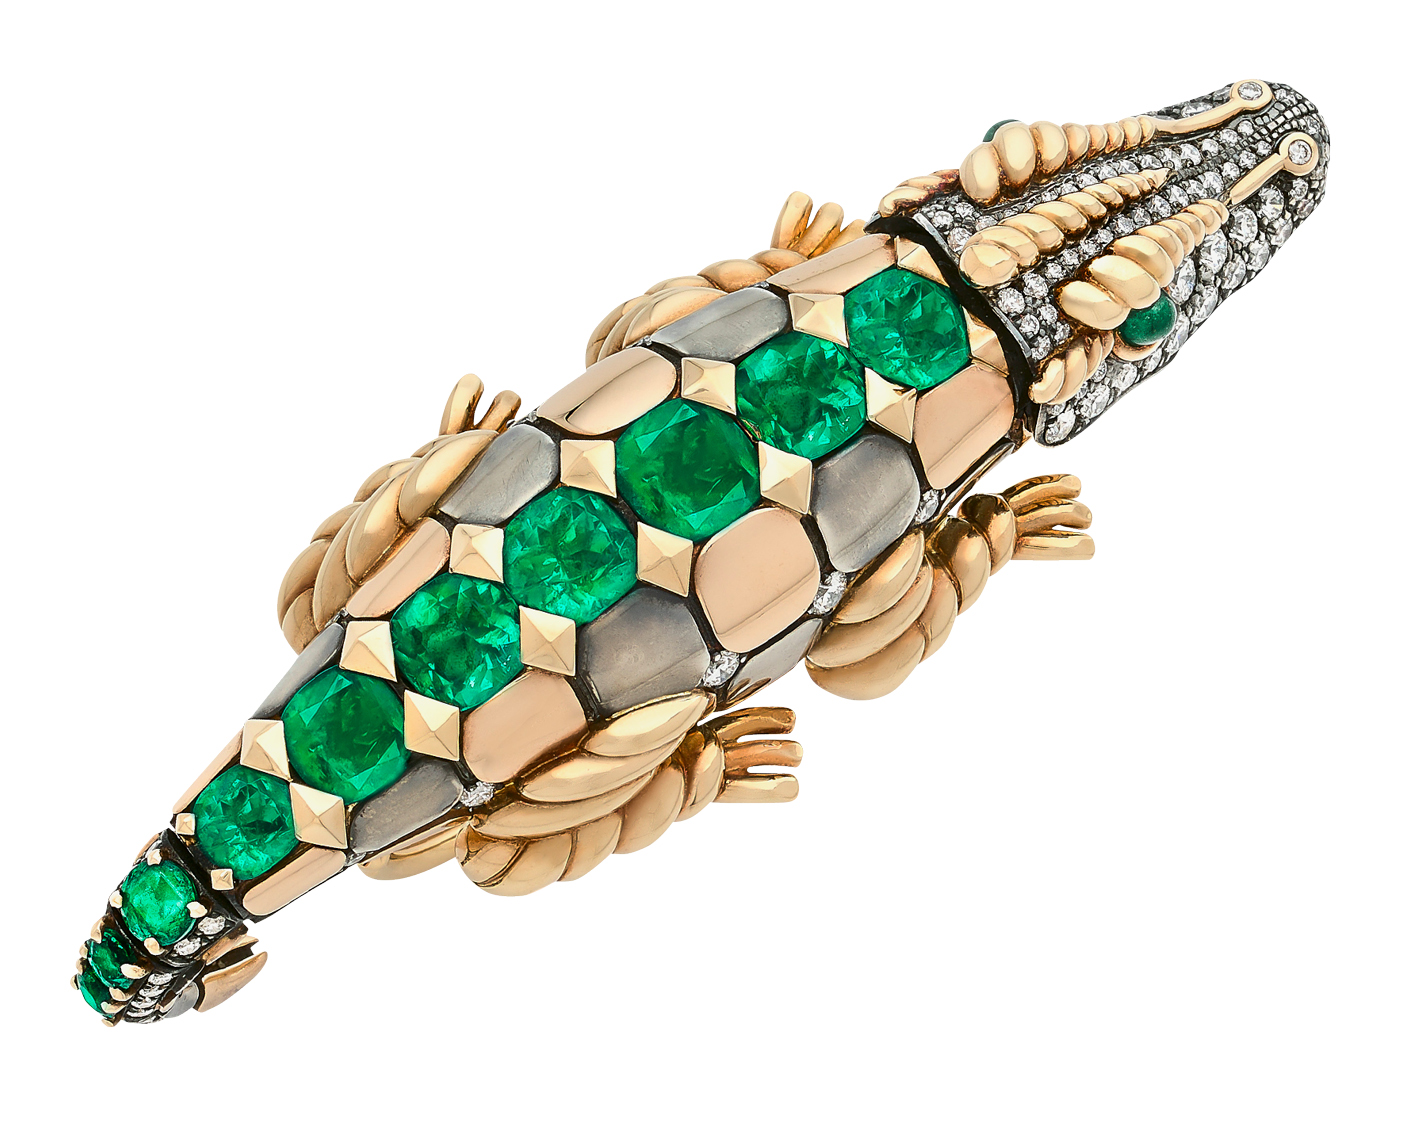 Emerald crocodile ring by Elie Top